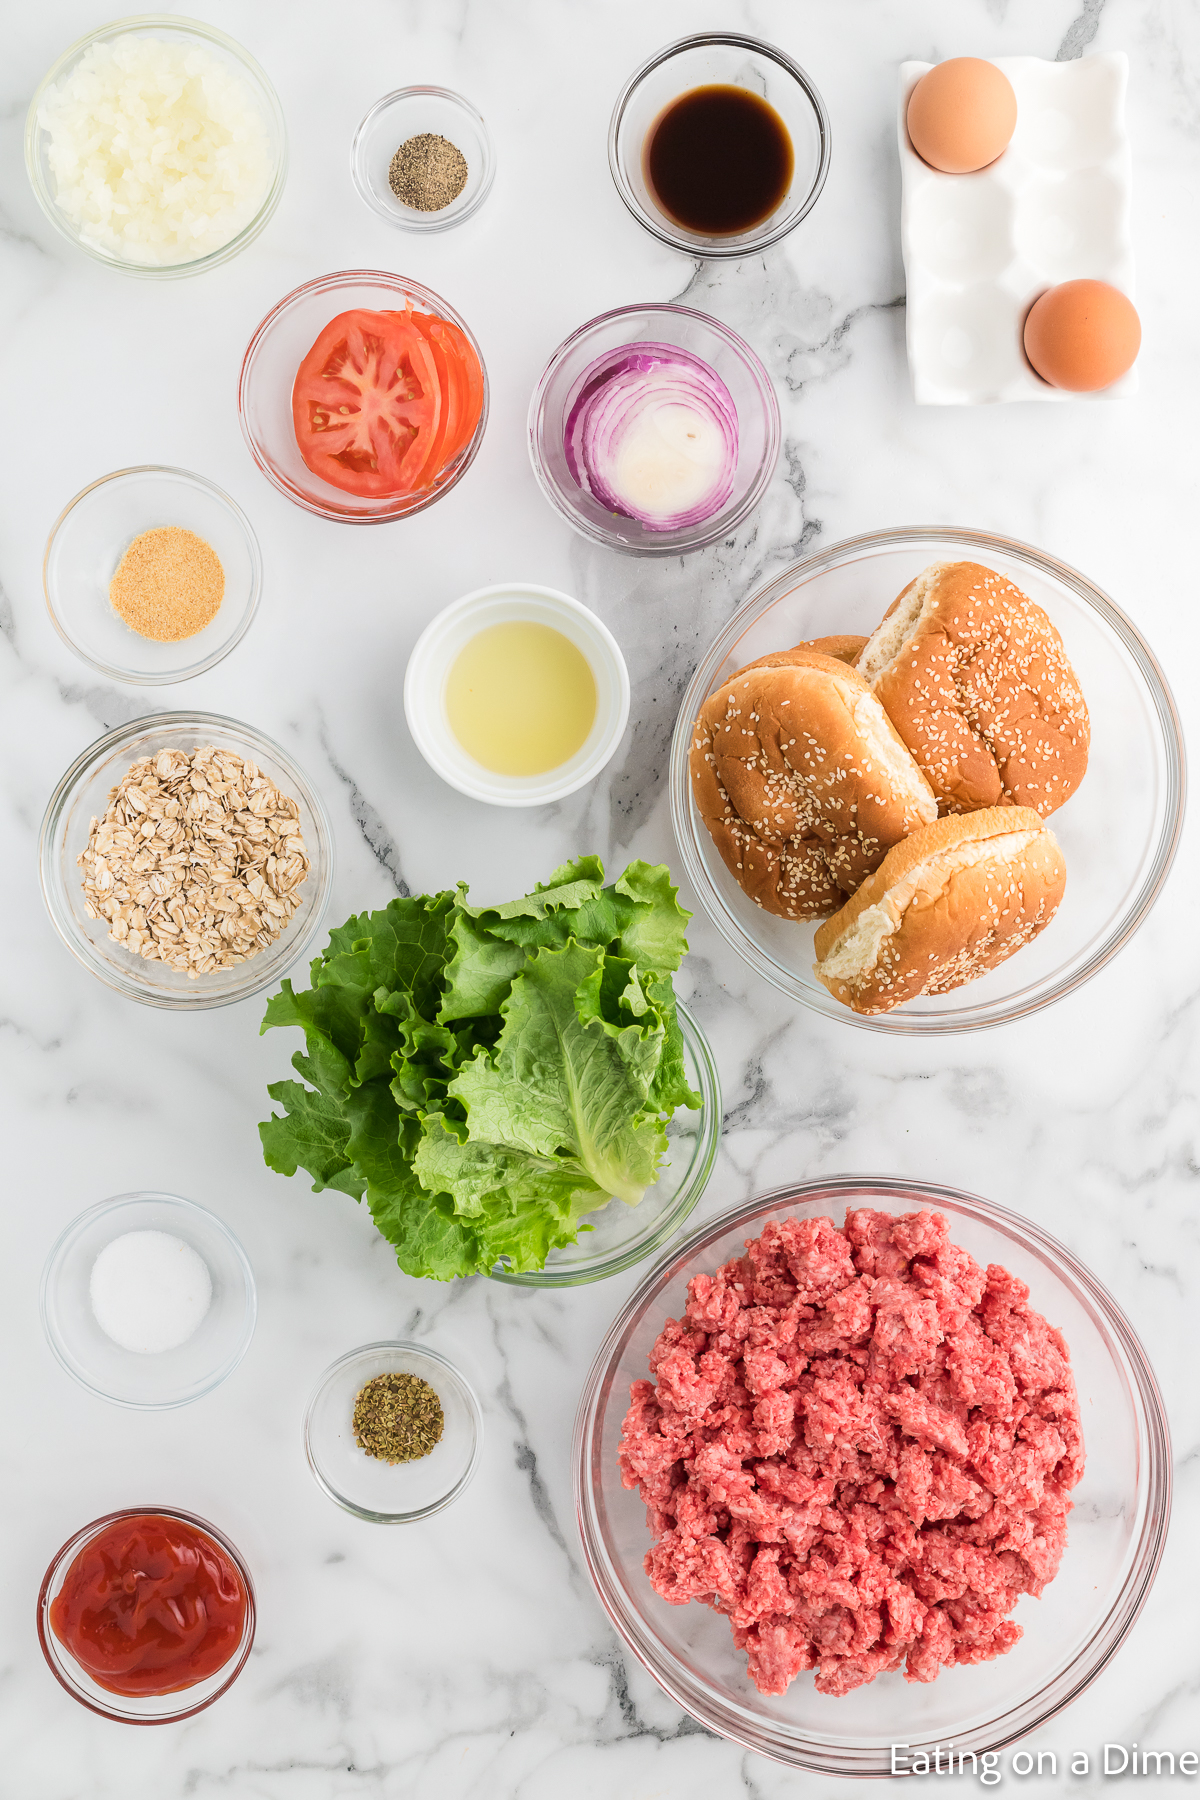 Ingredients for Meatloaf burgers. Ground beef, quick oats, eggs, onion, worcestershire sauce, ketchup, oregano, garlic powder, salt, pepper, buns, lettuce, tomato, red onion